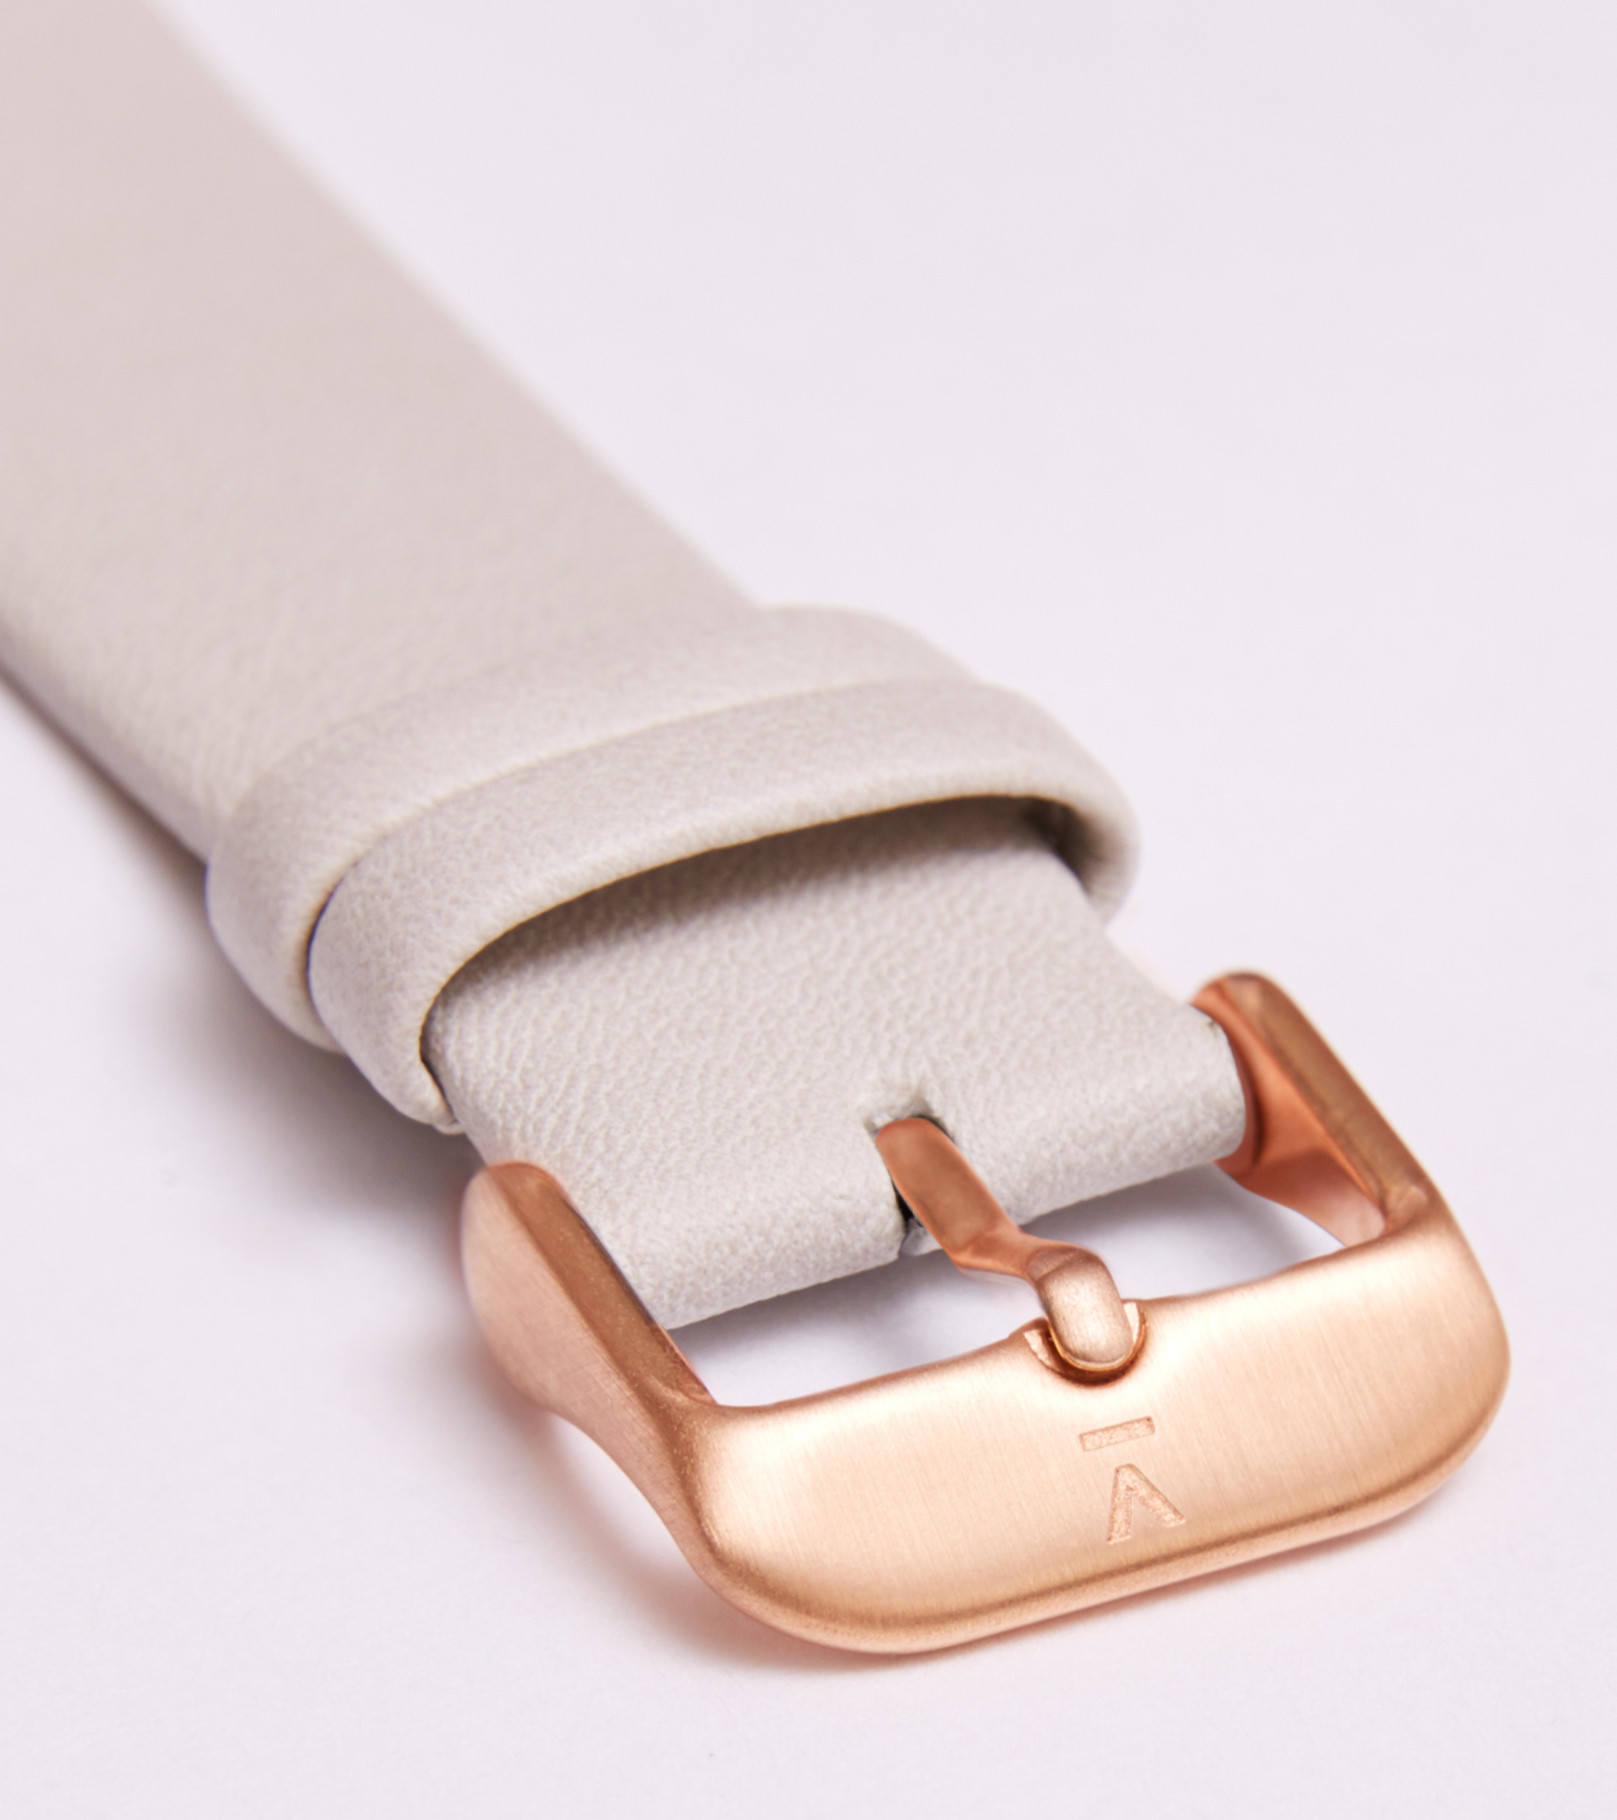 LIMITED EDITION // THE LIGHT GREY AND ROSE GOLD WATCH | VOTCH